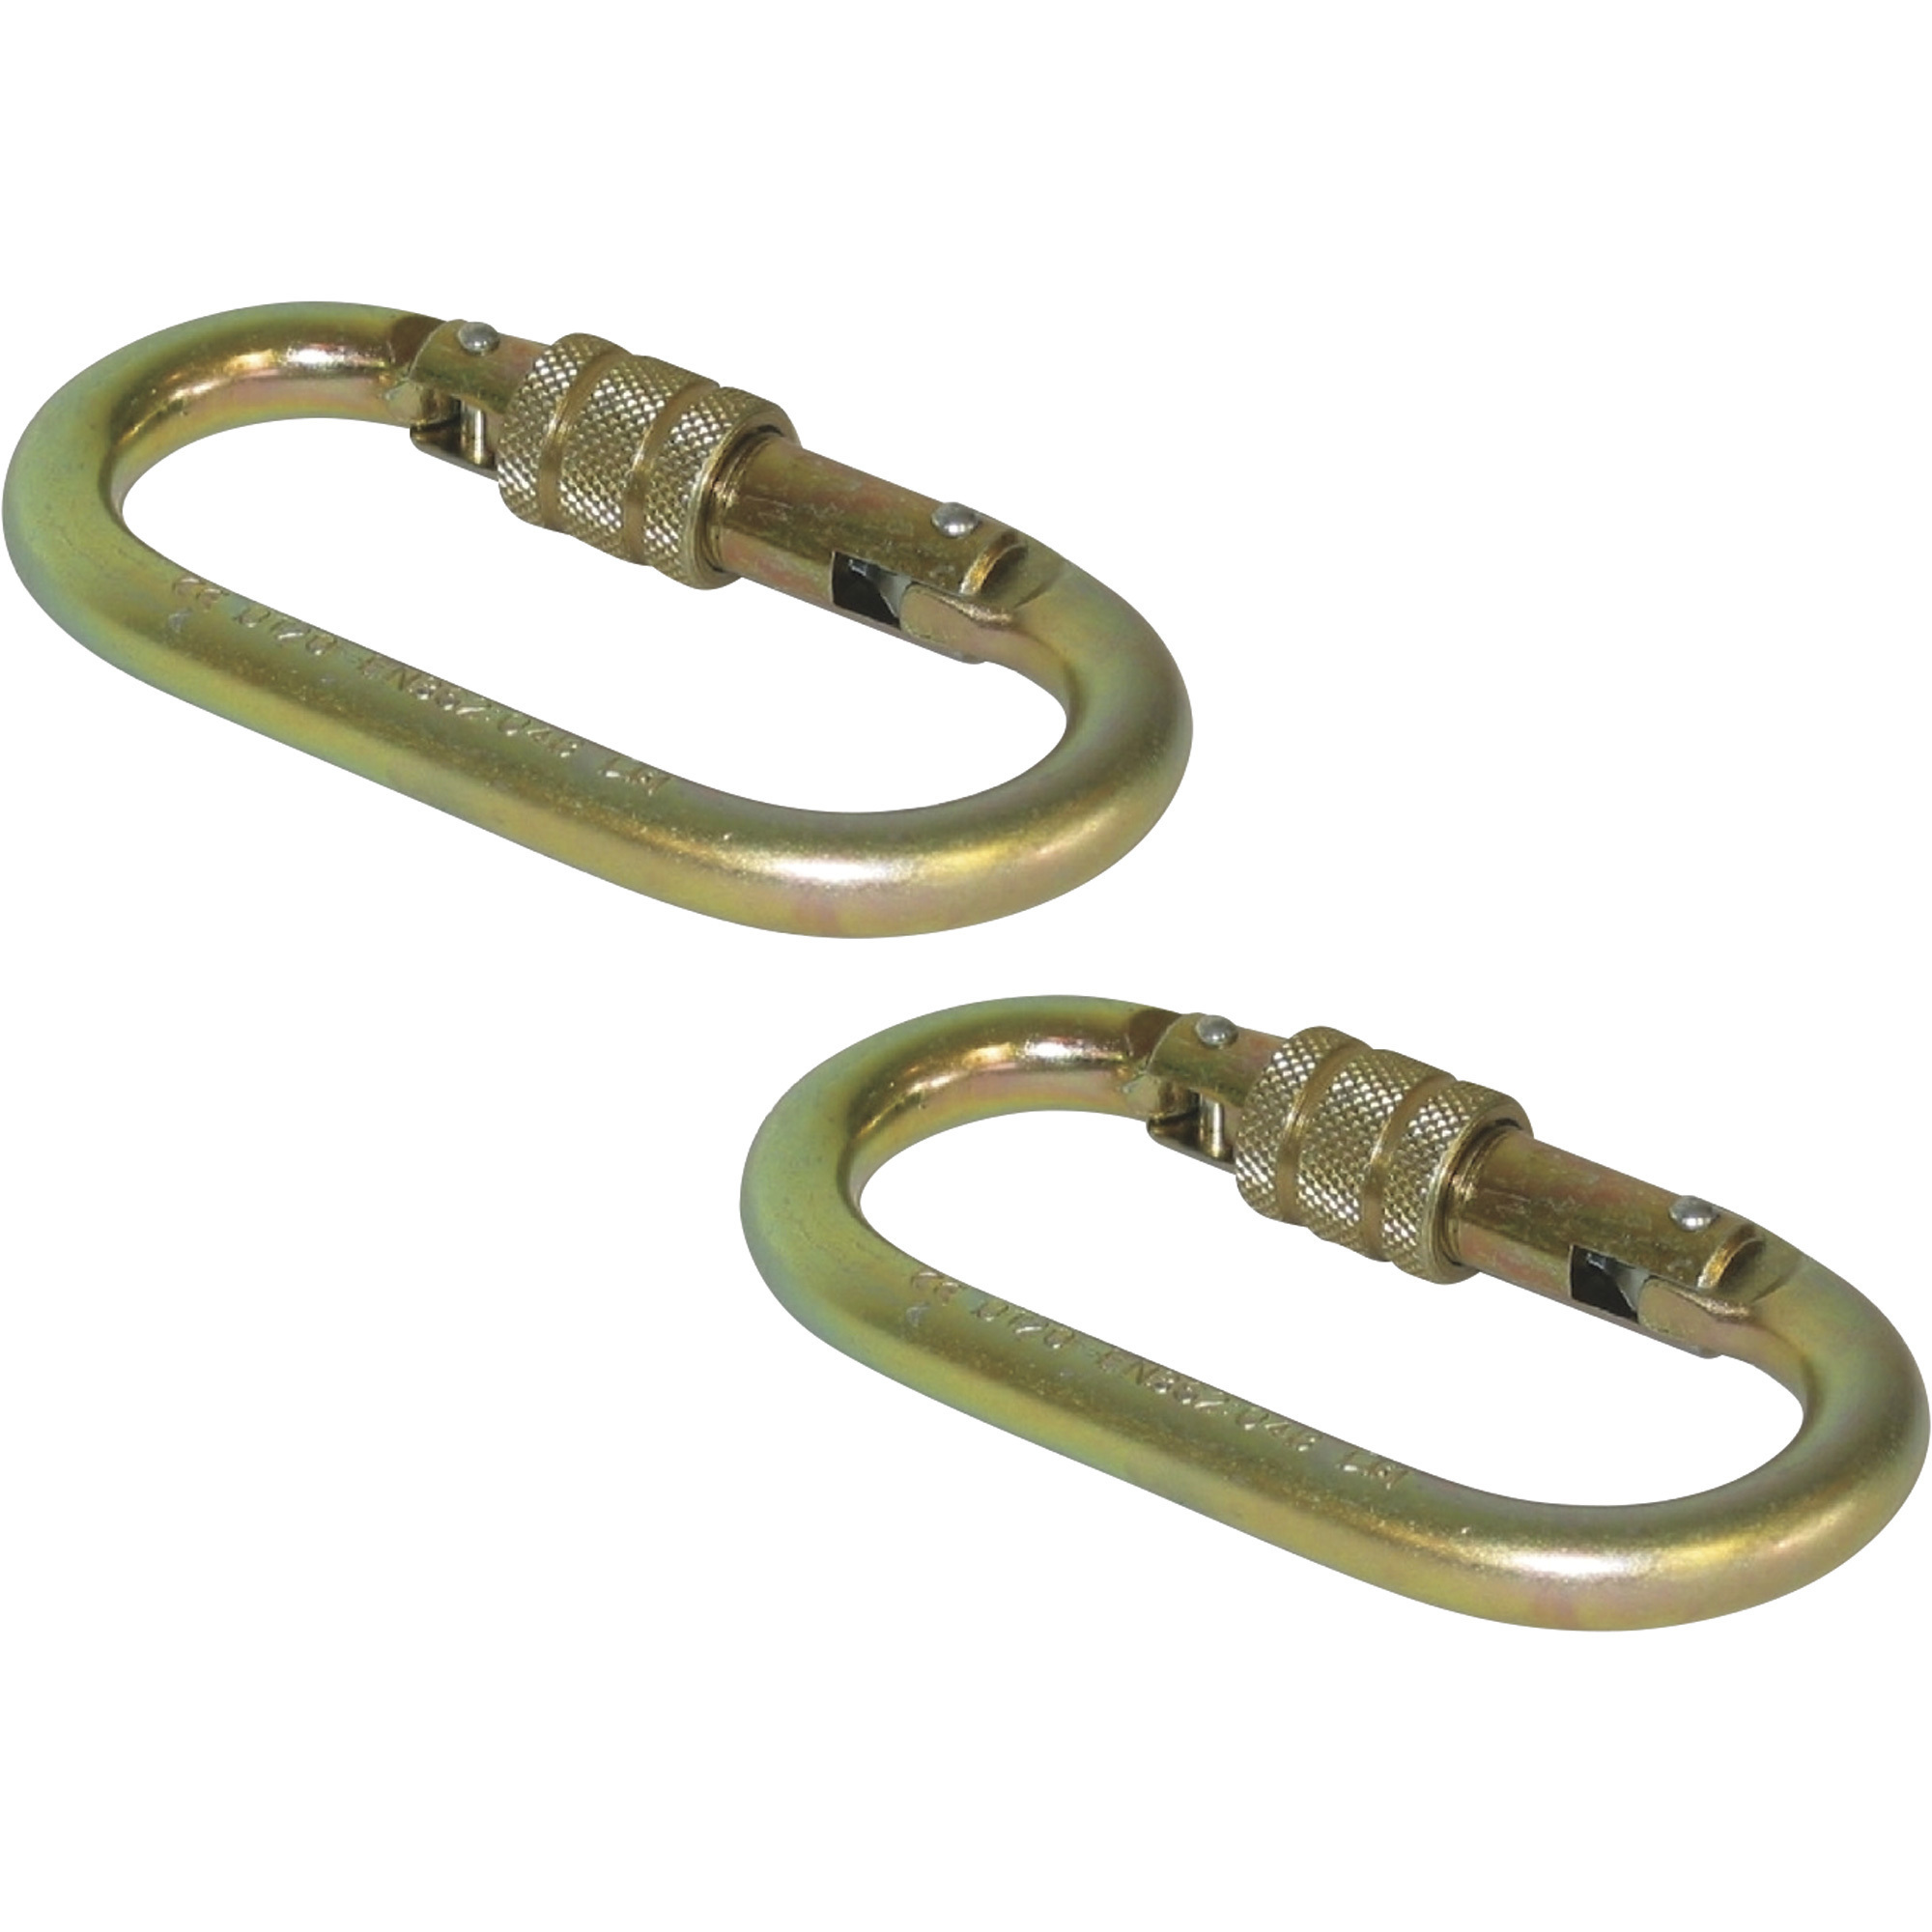 Portable Winch Steel Oval Locking Carabiner 2-Pack, 5000-Lb. Capacity, Model PCA-1276X2